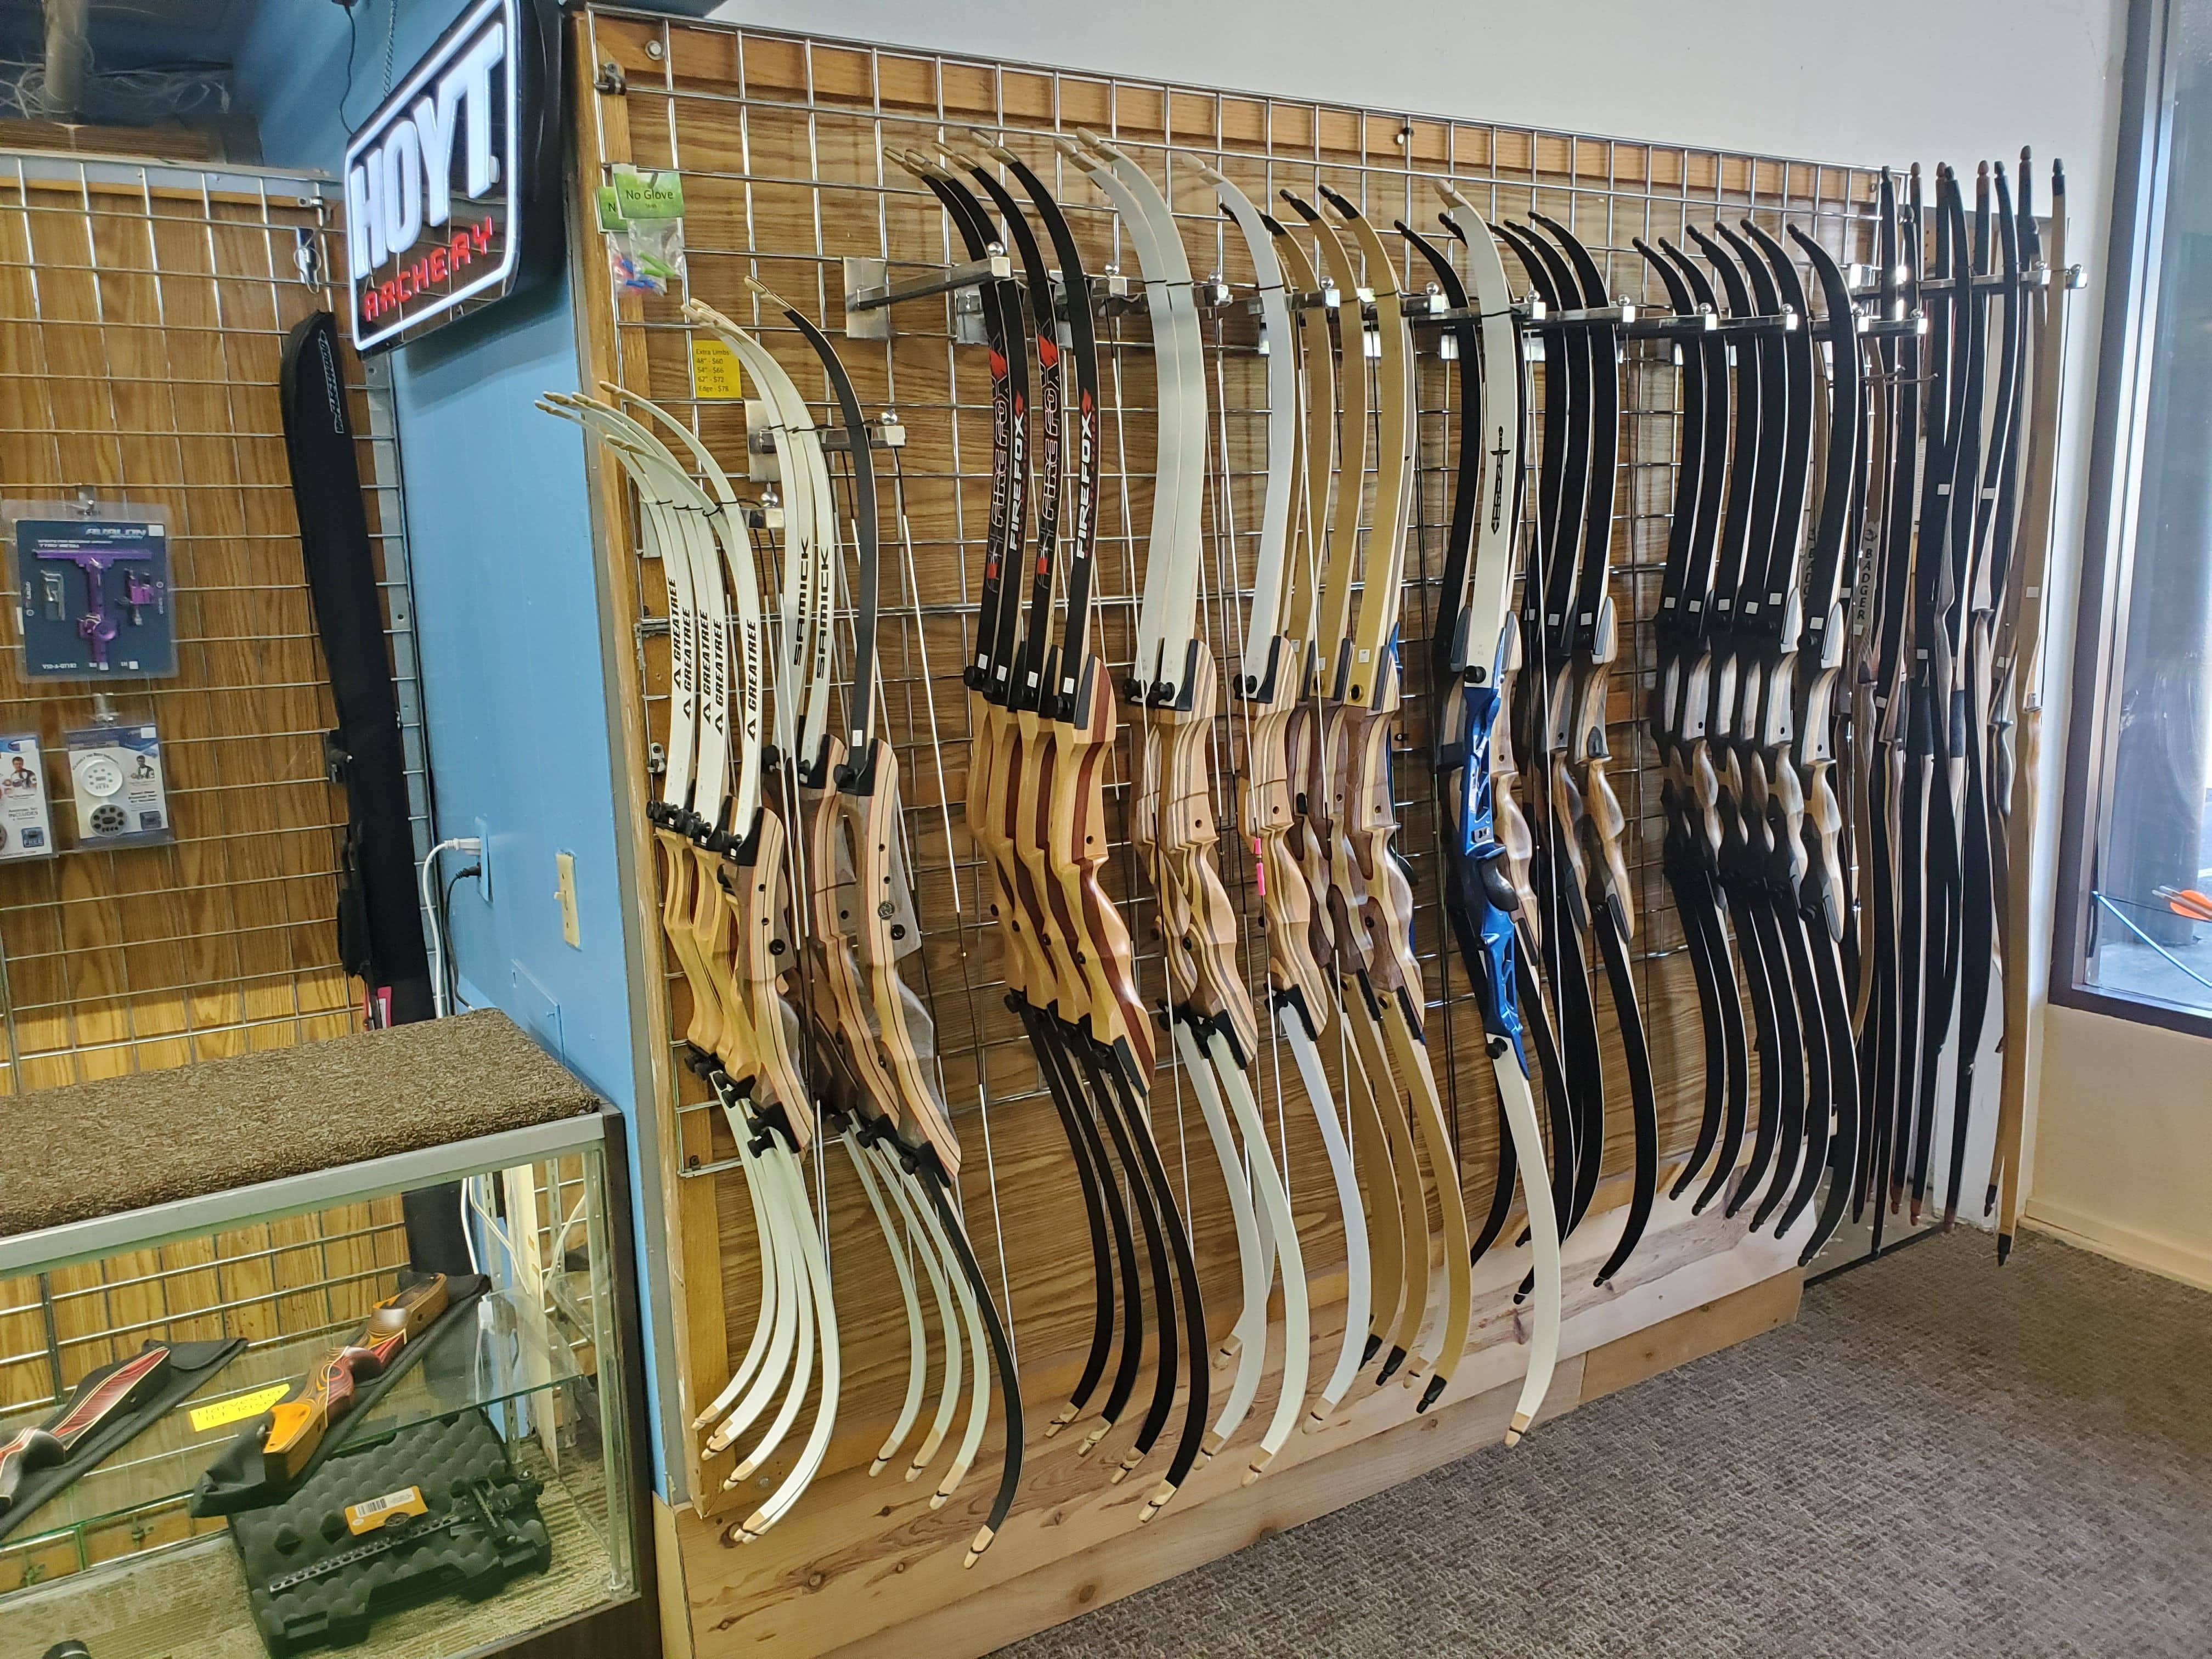 Recurve bows for everyone!